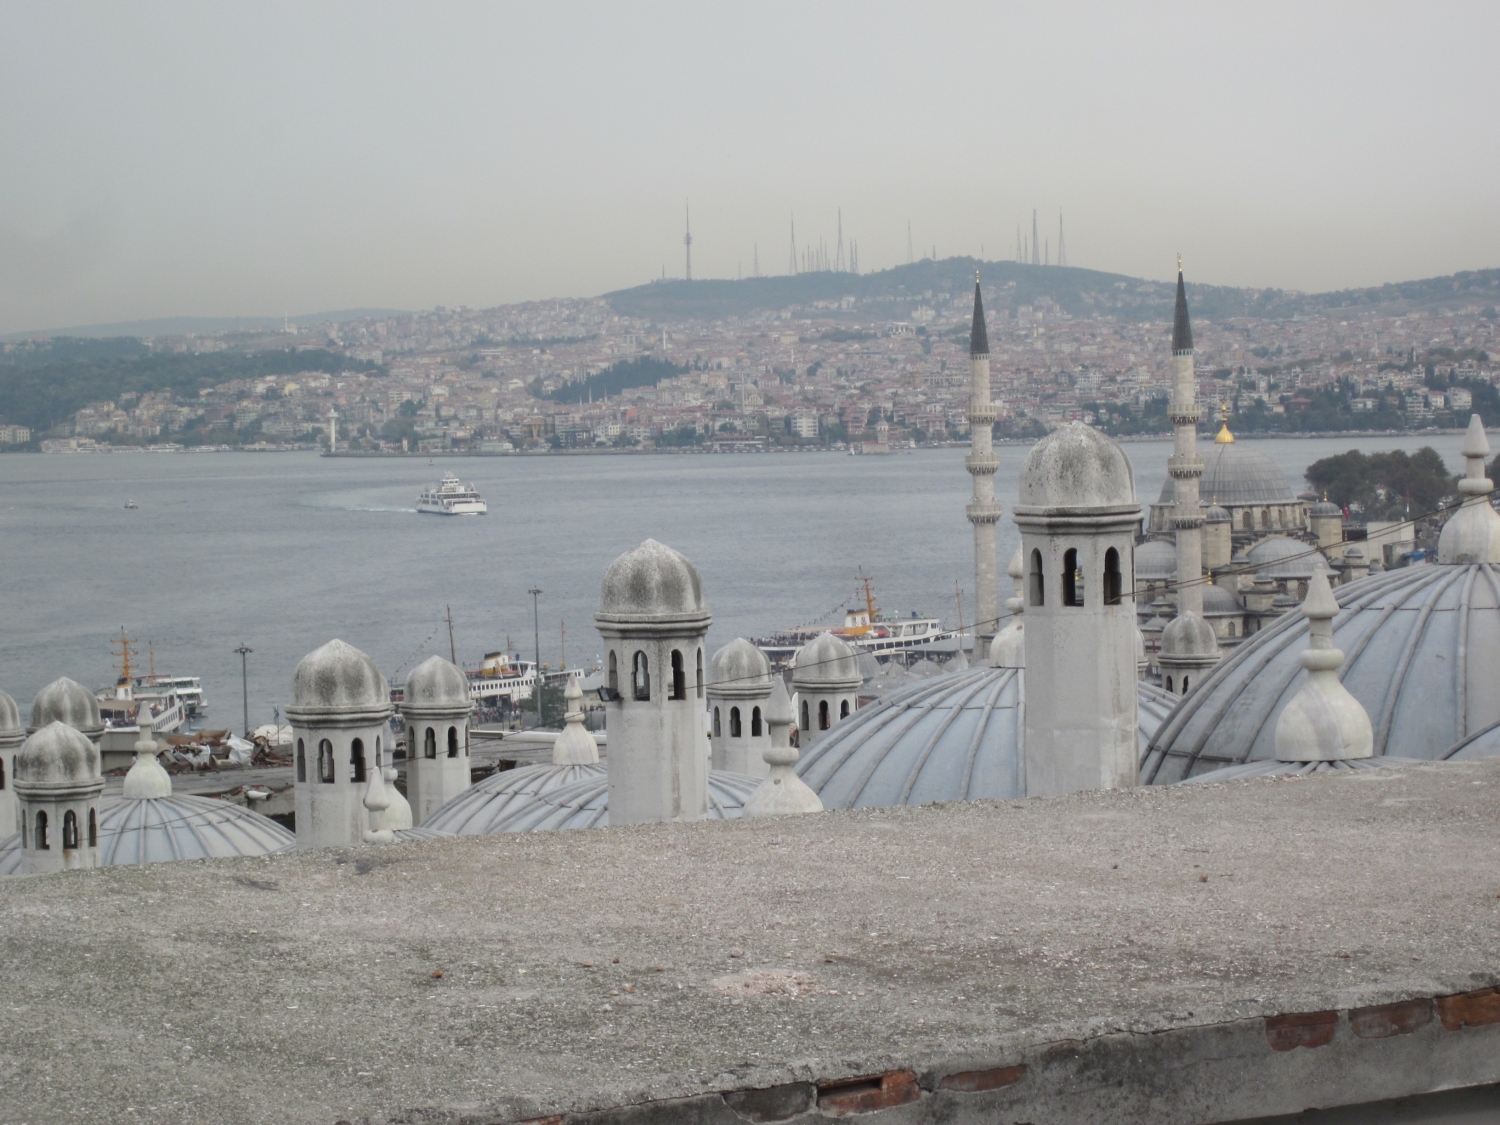 Süleymaniye Külliyesi - View looking over domes and chimneys of the Suleymaniye Camii to the Bosporus and city along its banks